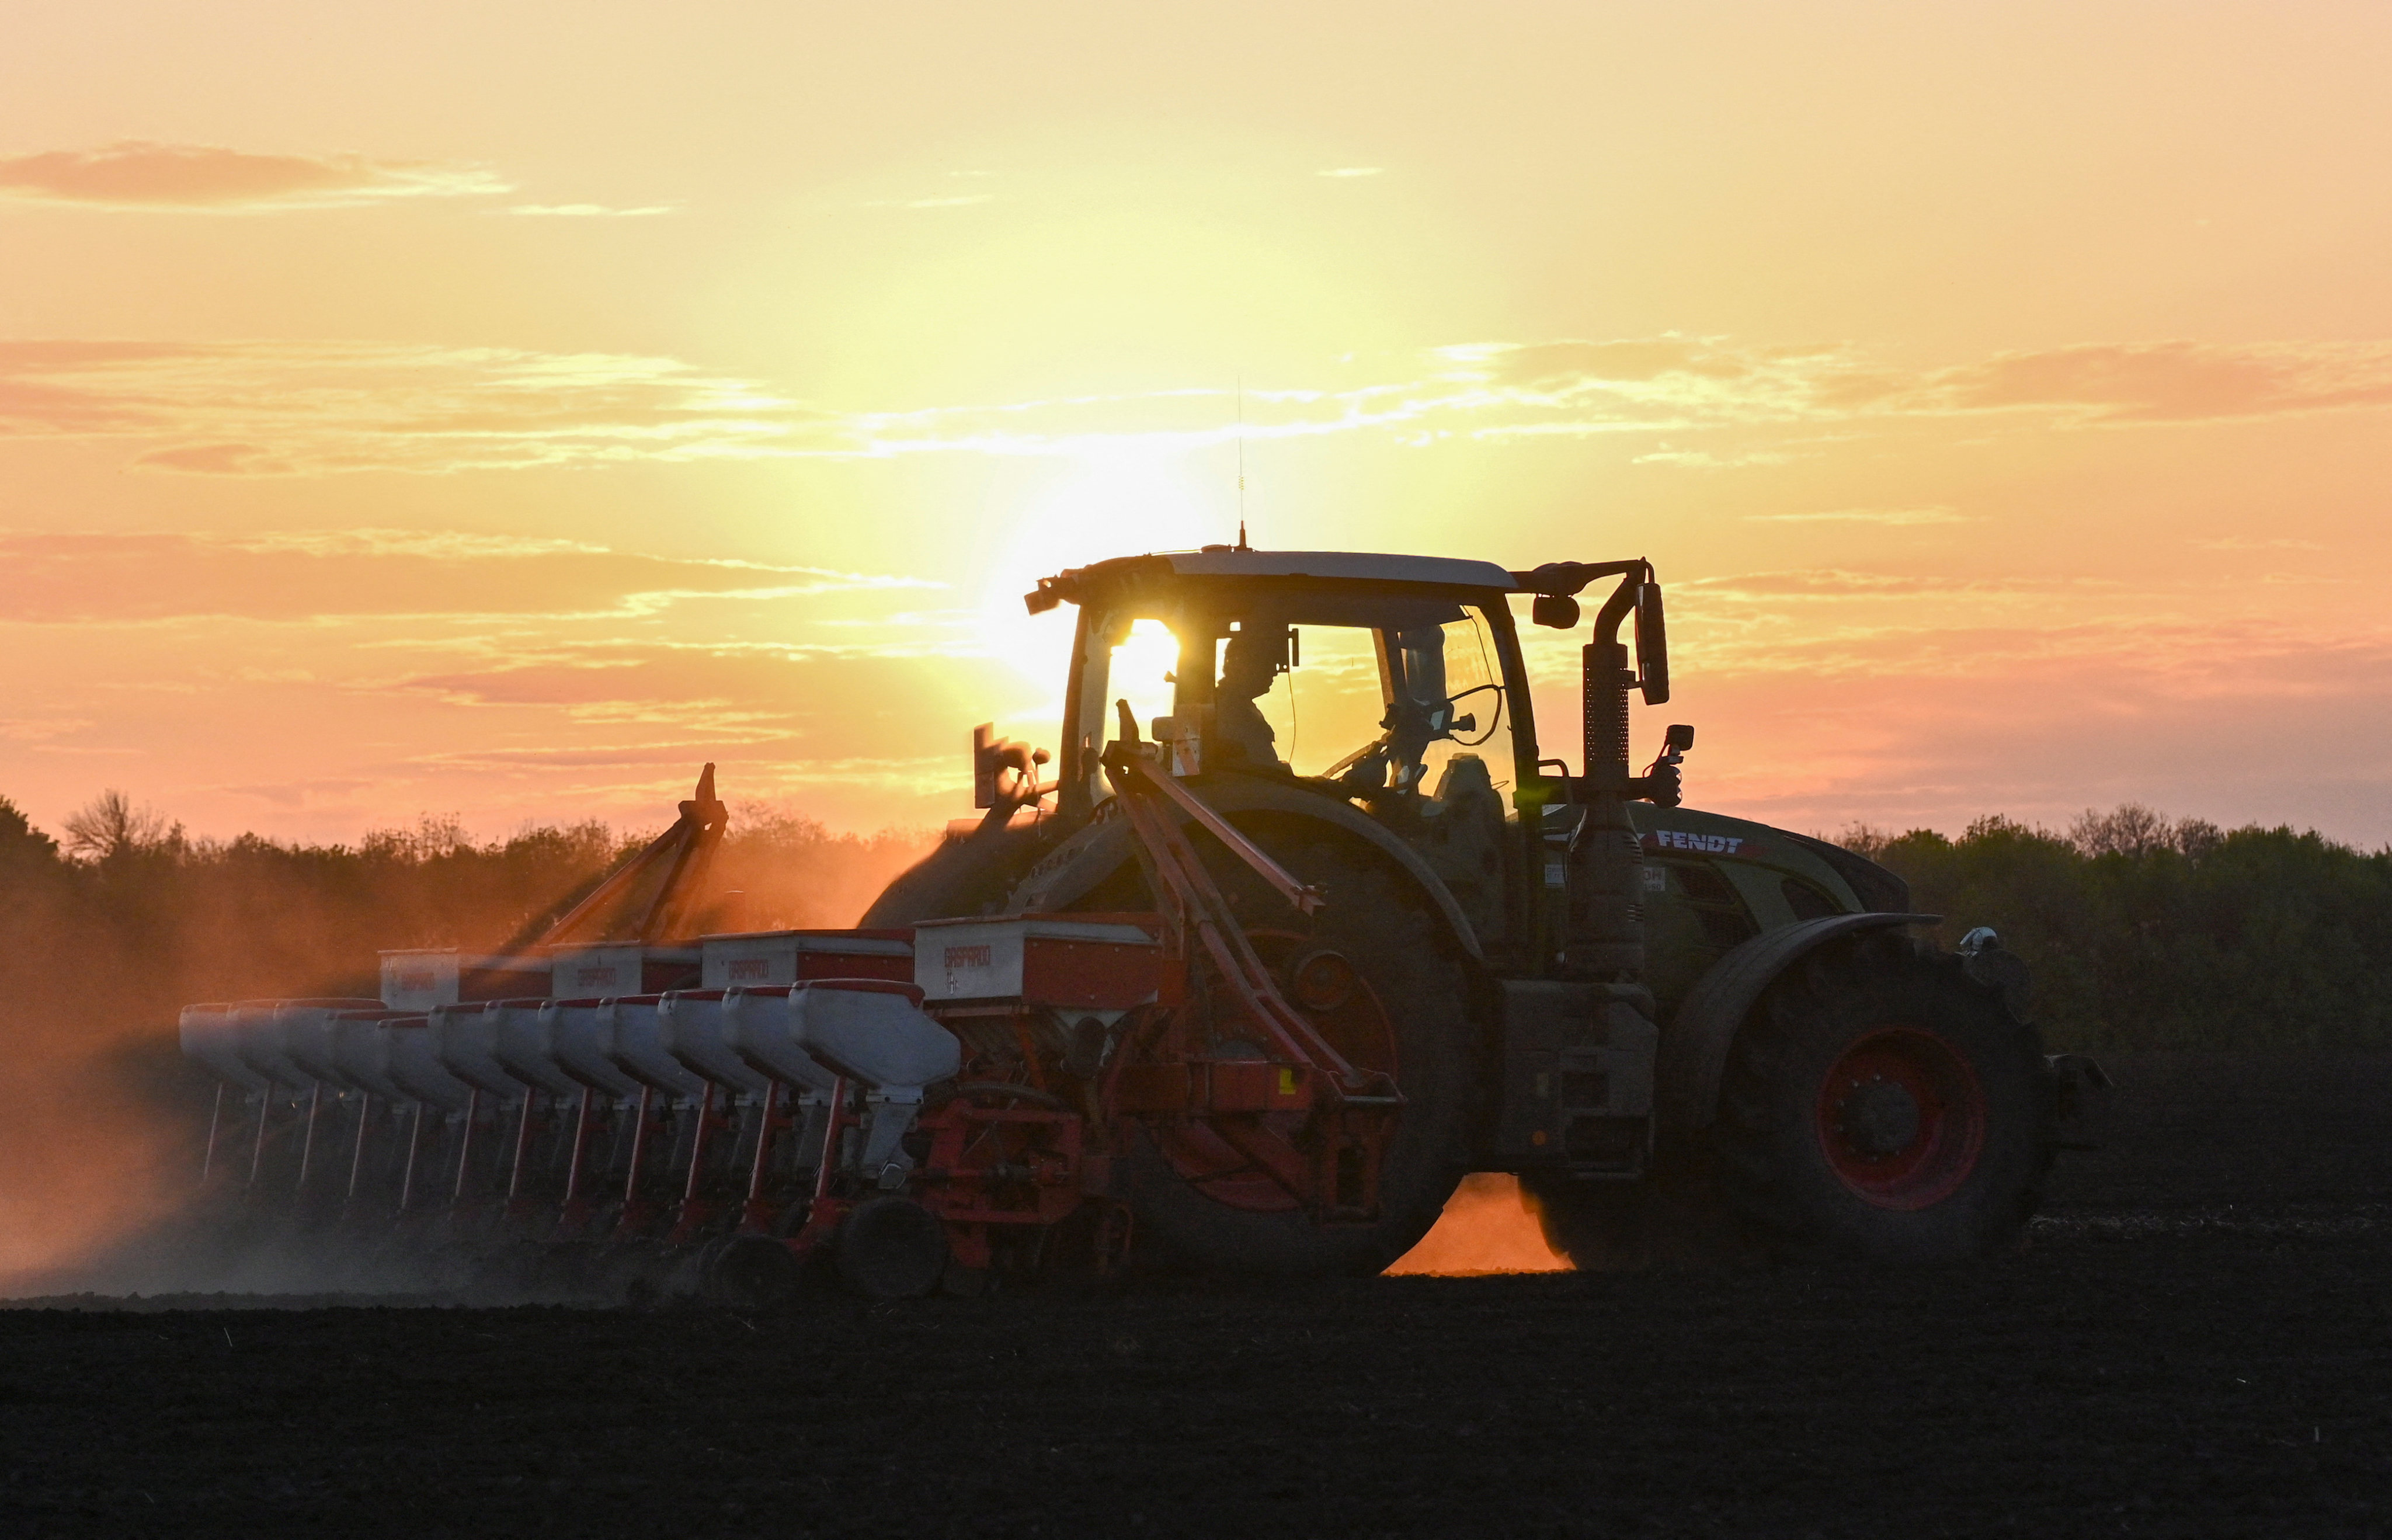 A farmer sows corn seeds at sunset near the village of Chaltyr in the Rostov region of Russia. China sees Russia and Central Asia as potentially important sources of food imports as it tries to solidify its food security supply chains. Photo: Reuters